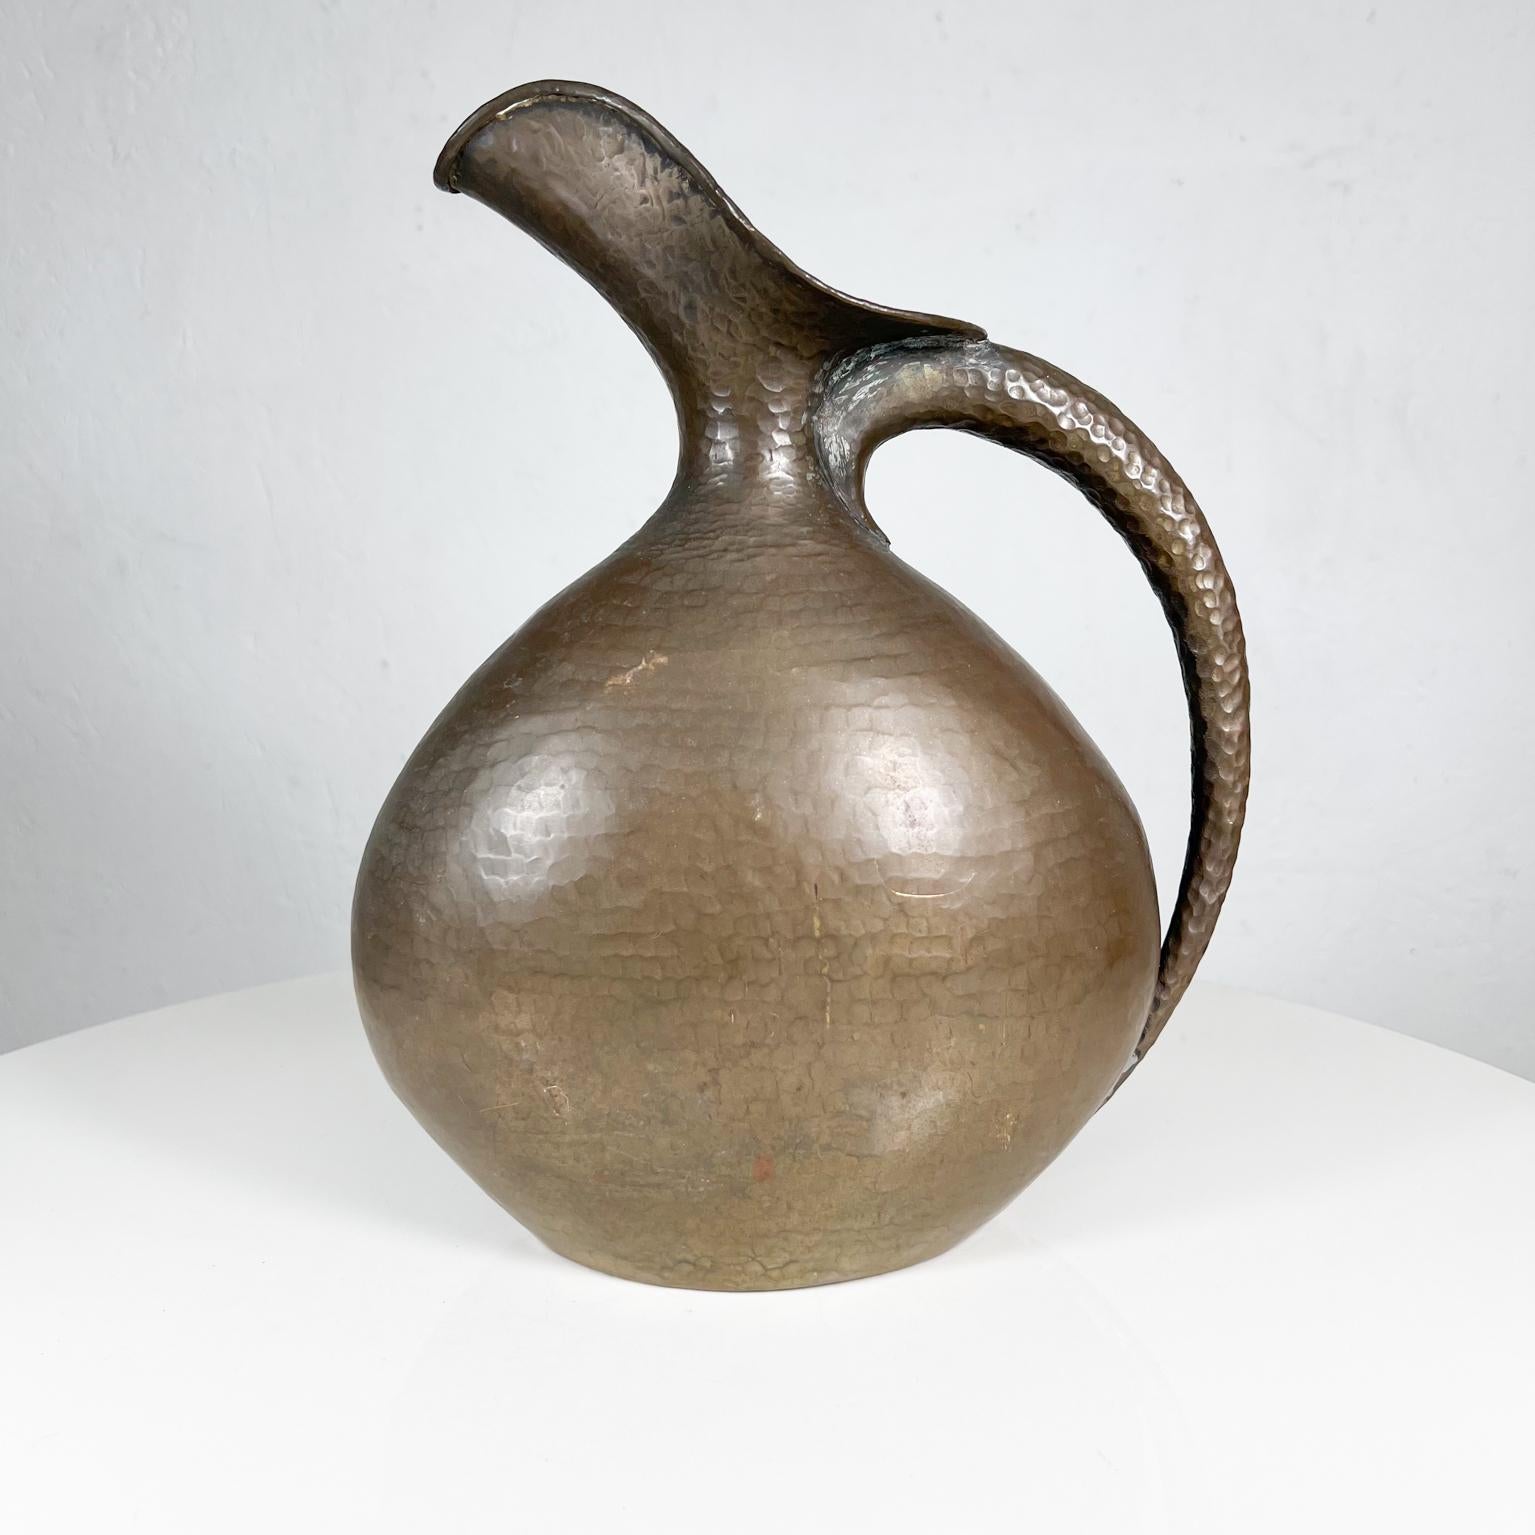 1940s Modernist hammered brass pitcher by Italian designer master craftsman, Egidio Casagrande, Italy. 
Measures: 12 tall x 9.5 W x 4.63 D.
Maker stamped Italia numbered, Egidio Casagrande.
Preowned original vintage condition.
See images